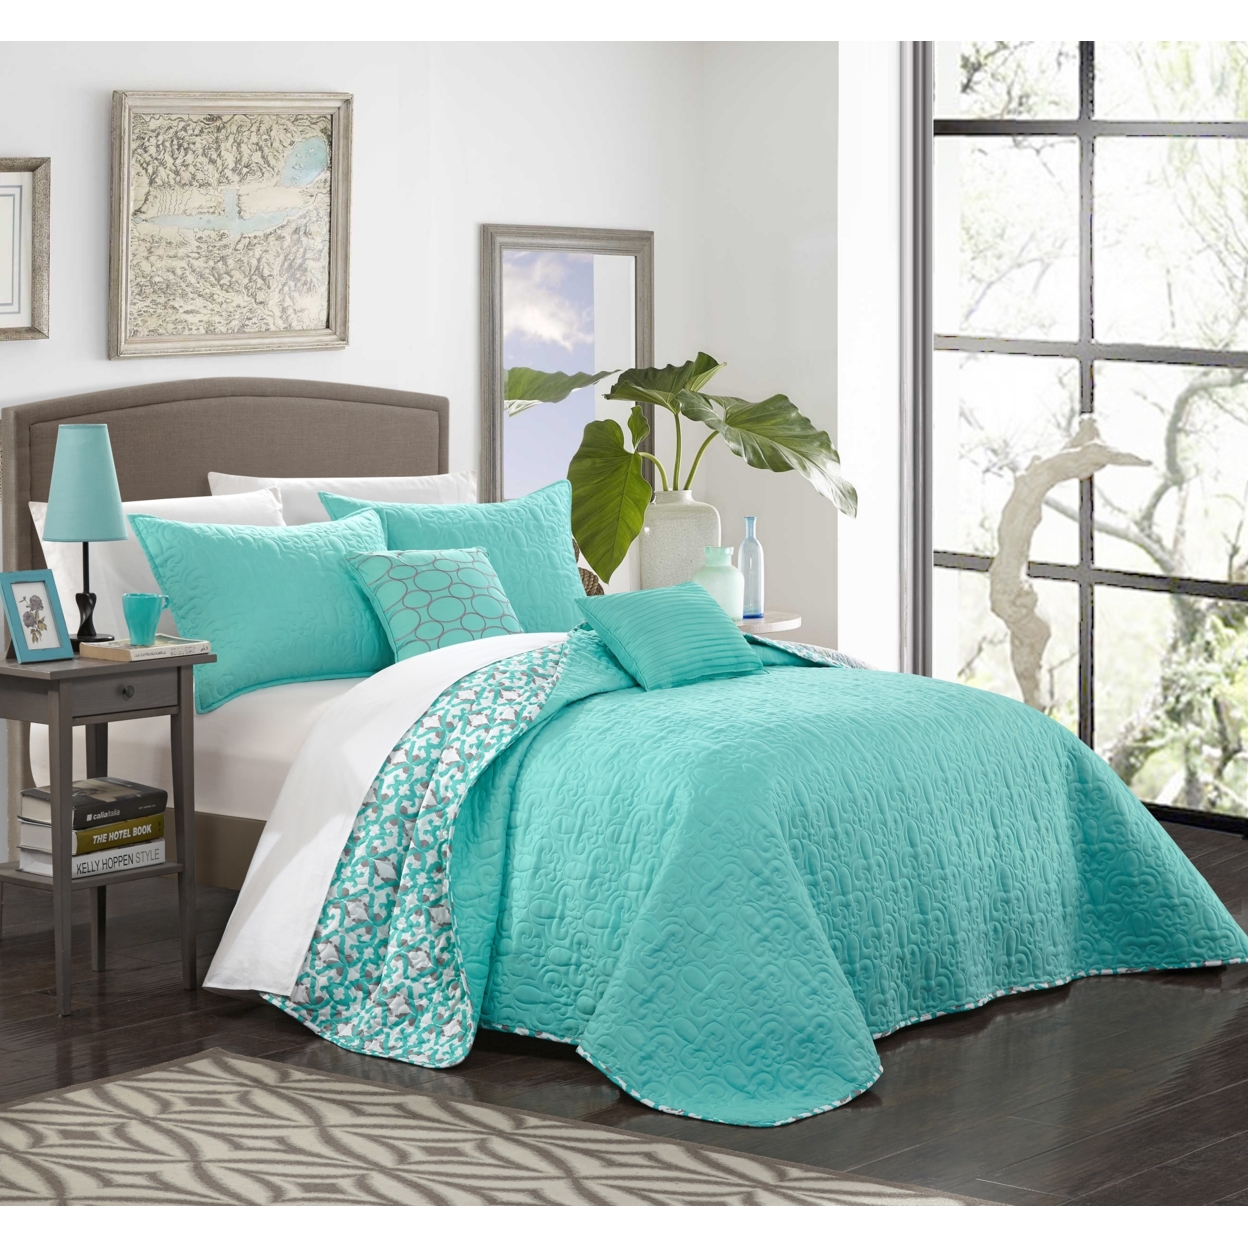 5 Piece Nalla Quilted Flor De Lis Patterned REVERSIBLE Printed Quilt Set, Shams And Decorative Pillows Included - Aqua, Queen